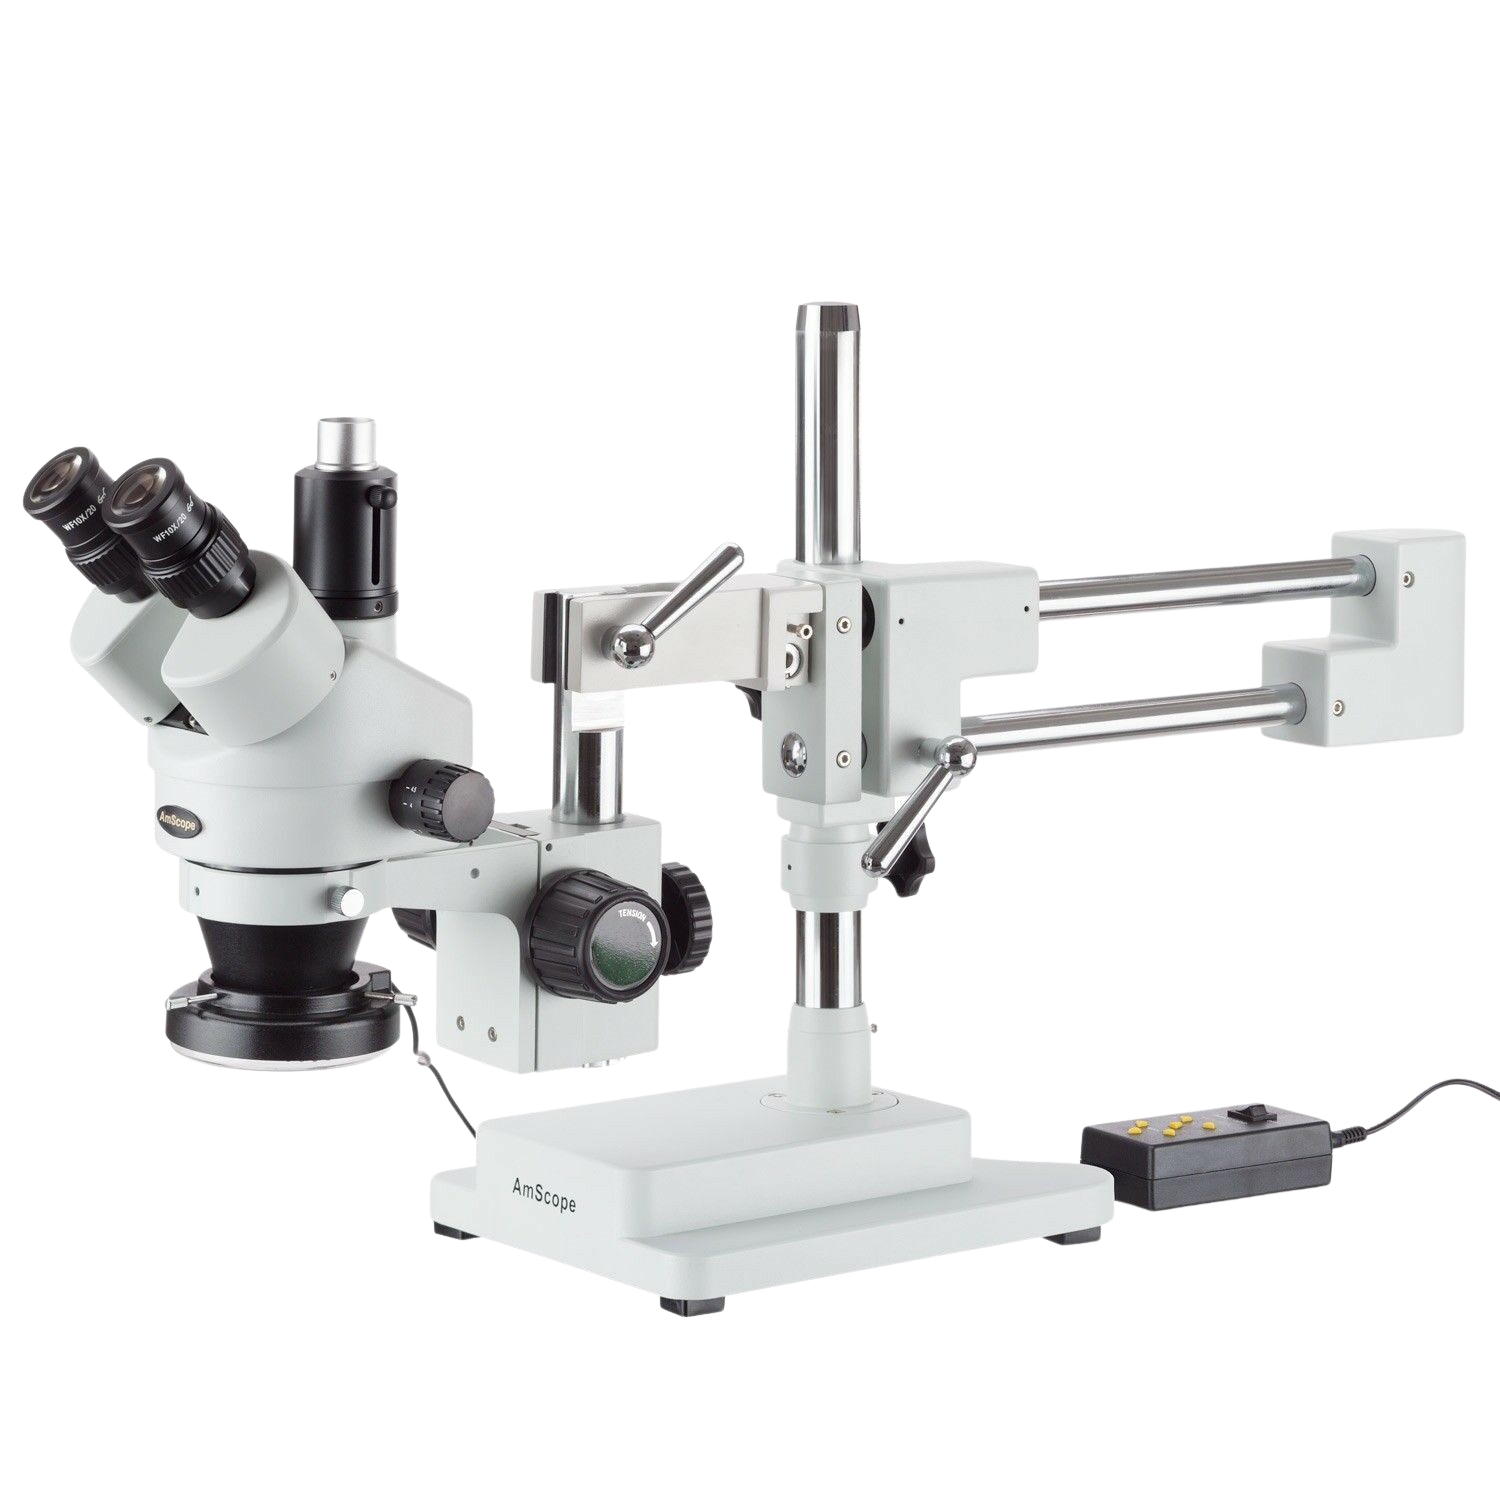 AmScope, Amscope SM-4TZ-144A 3.5X - 90X Trinocular Stereo Microscope with 4 Zone 144 LED Ring Light New